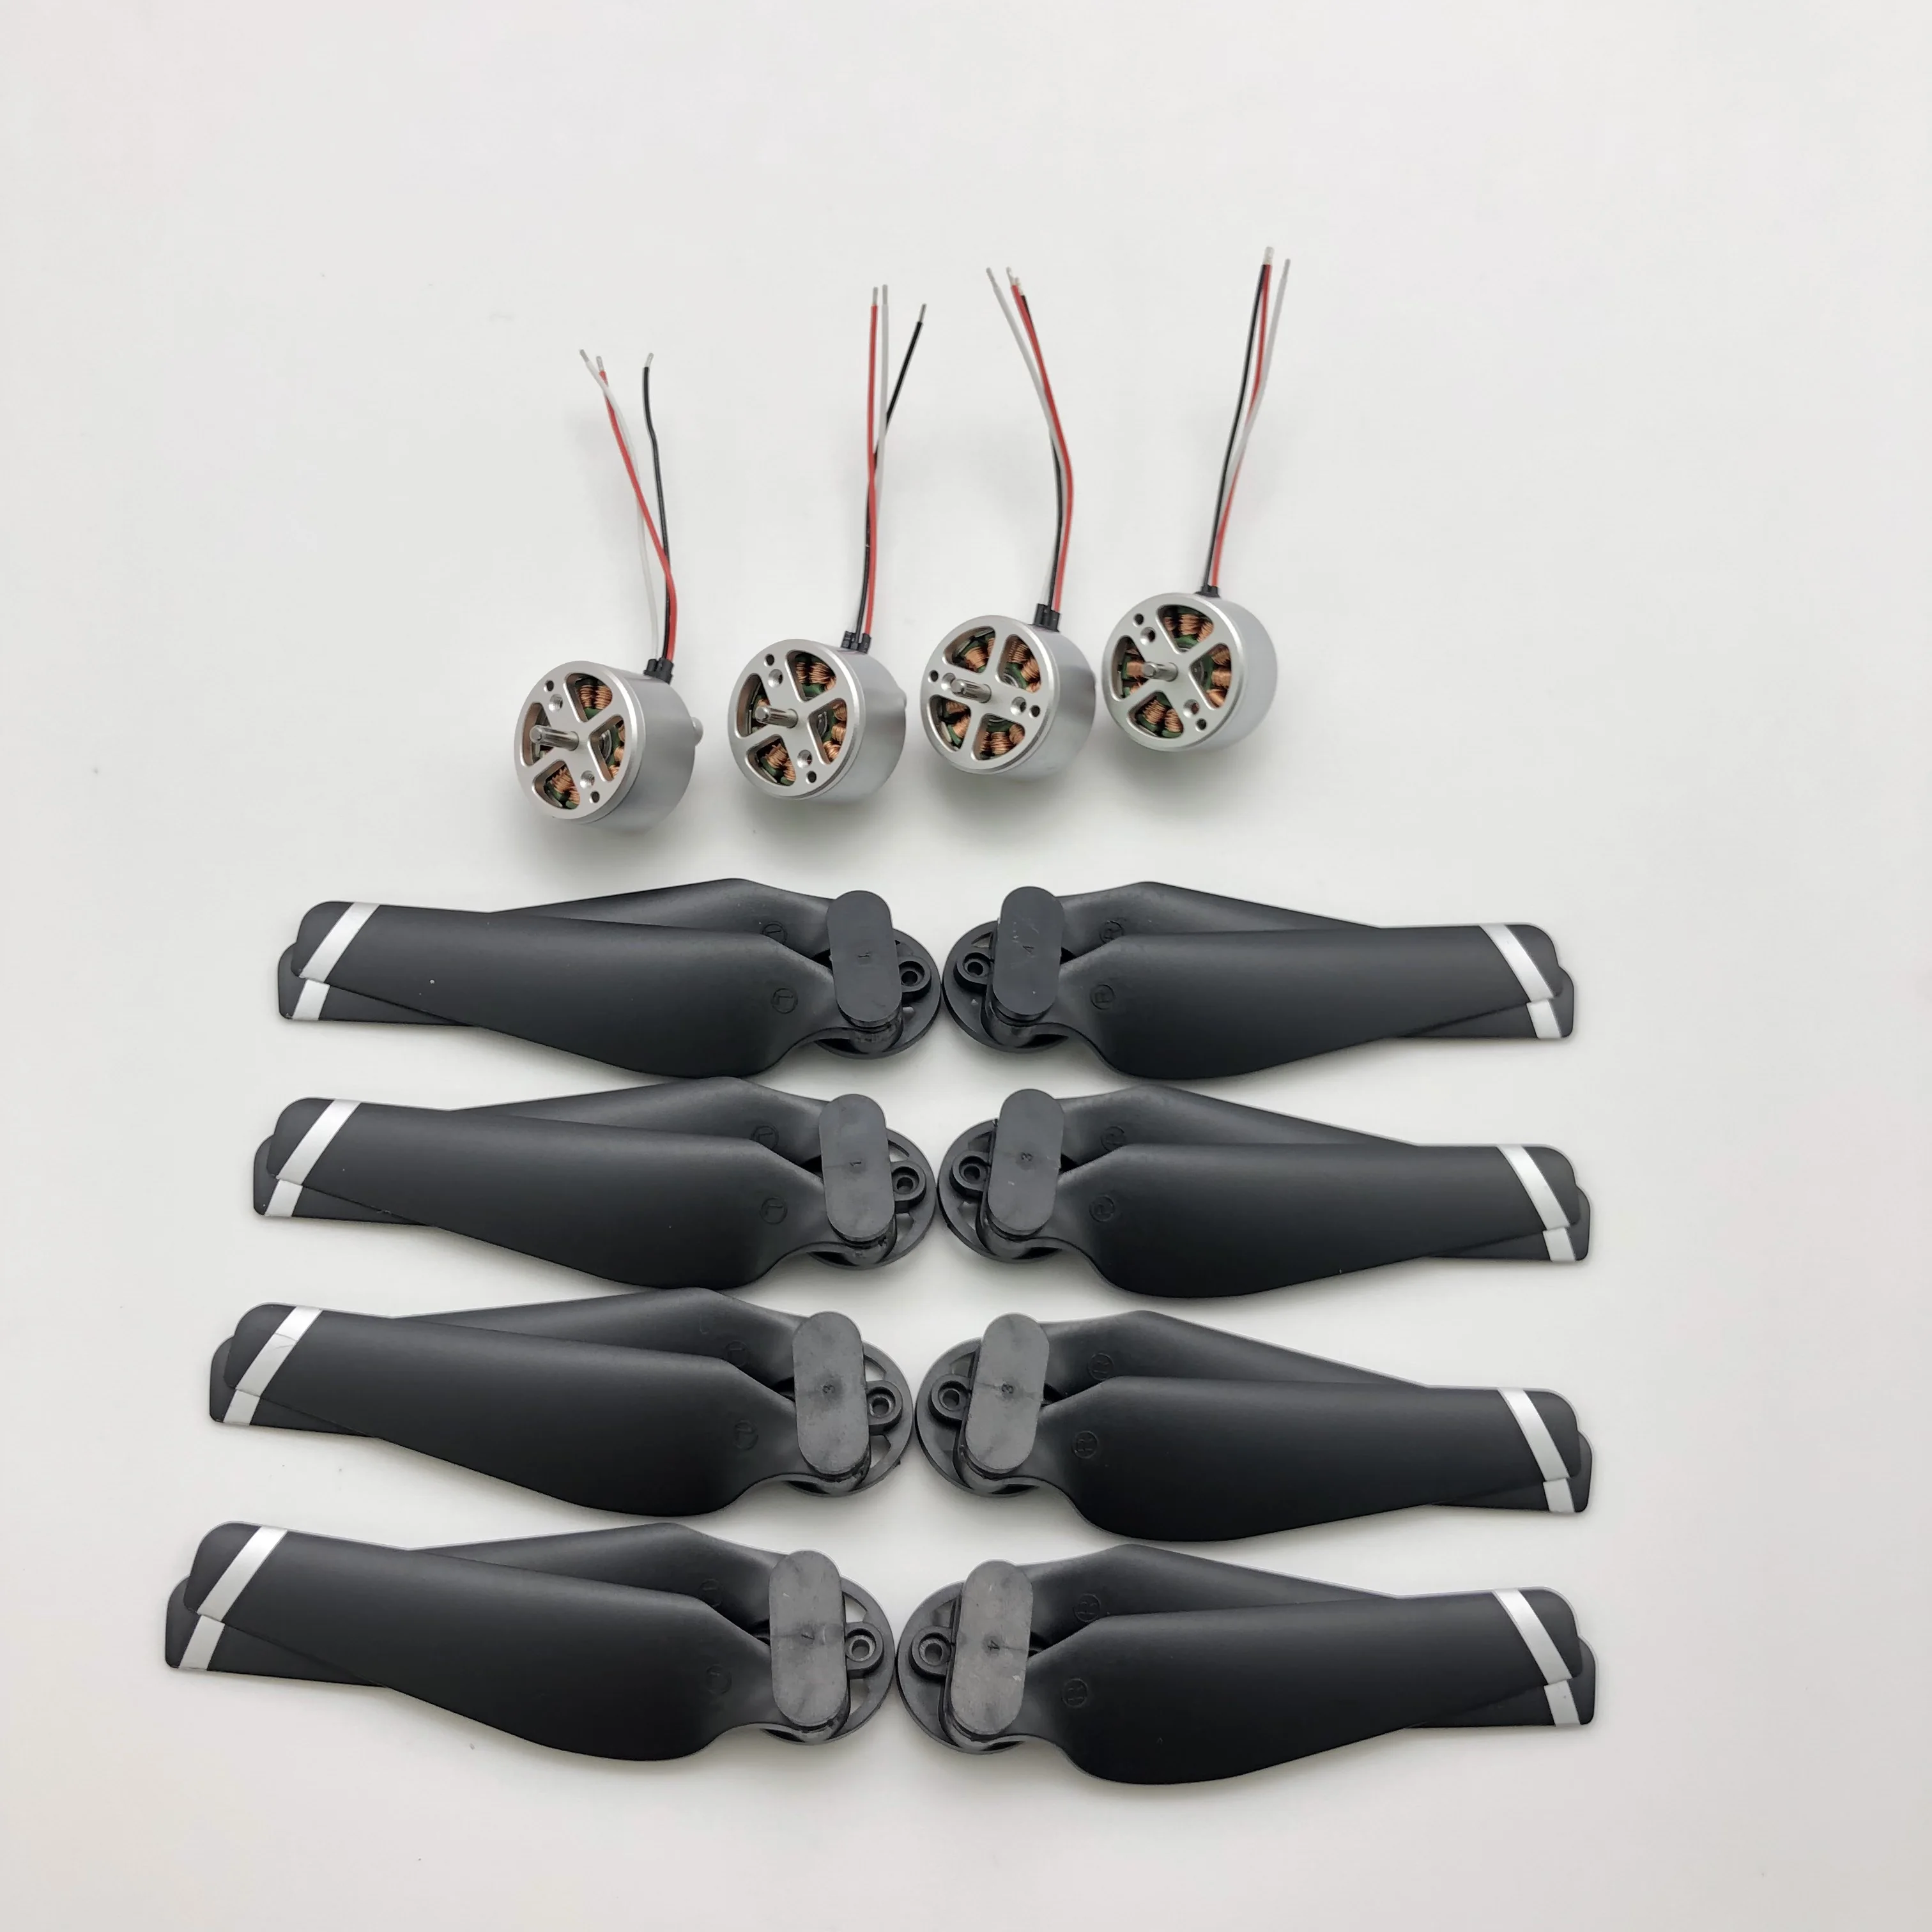 

12PCS KF102 Drone Accessories 4PCS Brushless Motor + 8PCS CW CCW Propeller Blade Spare Parts for KF102MAX RC Quadcopter